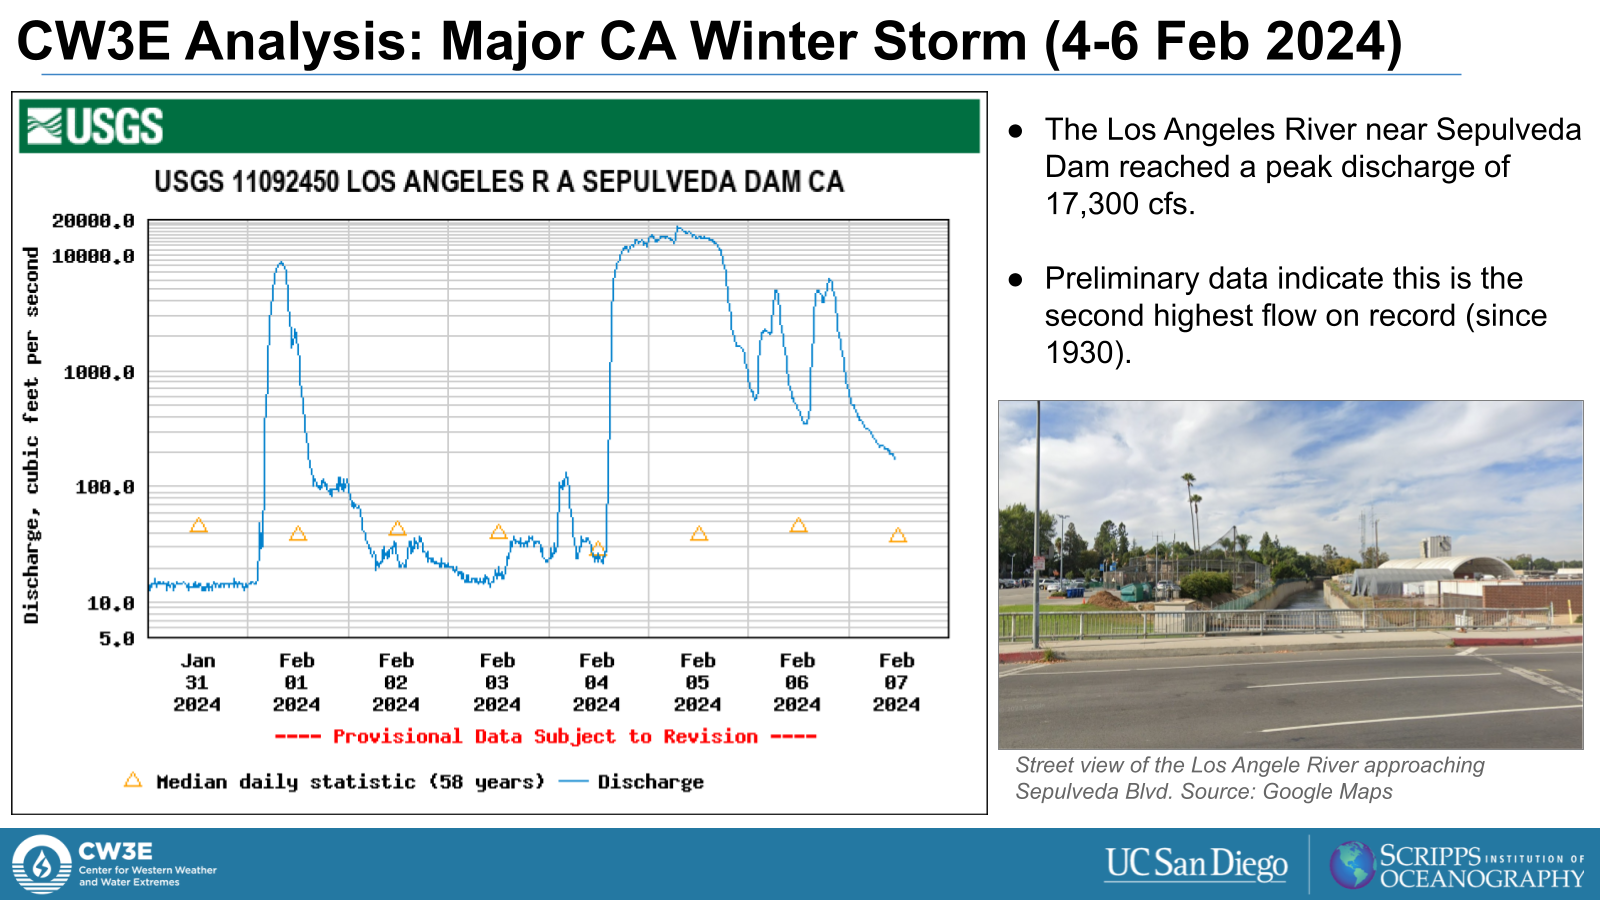 River gage data for the Los Angeles River